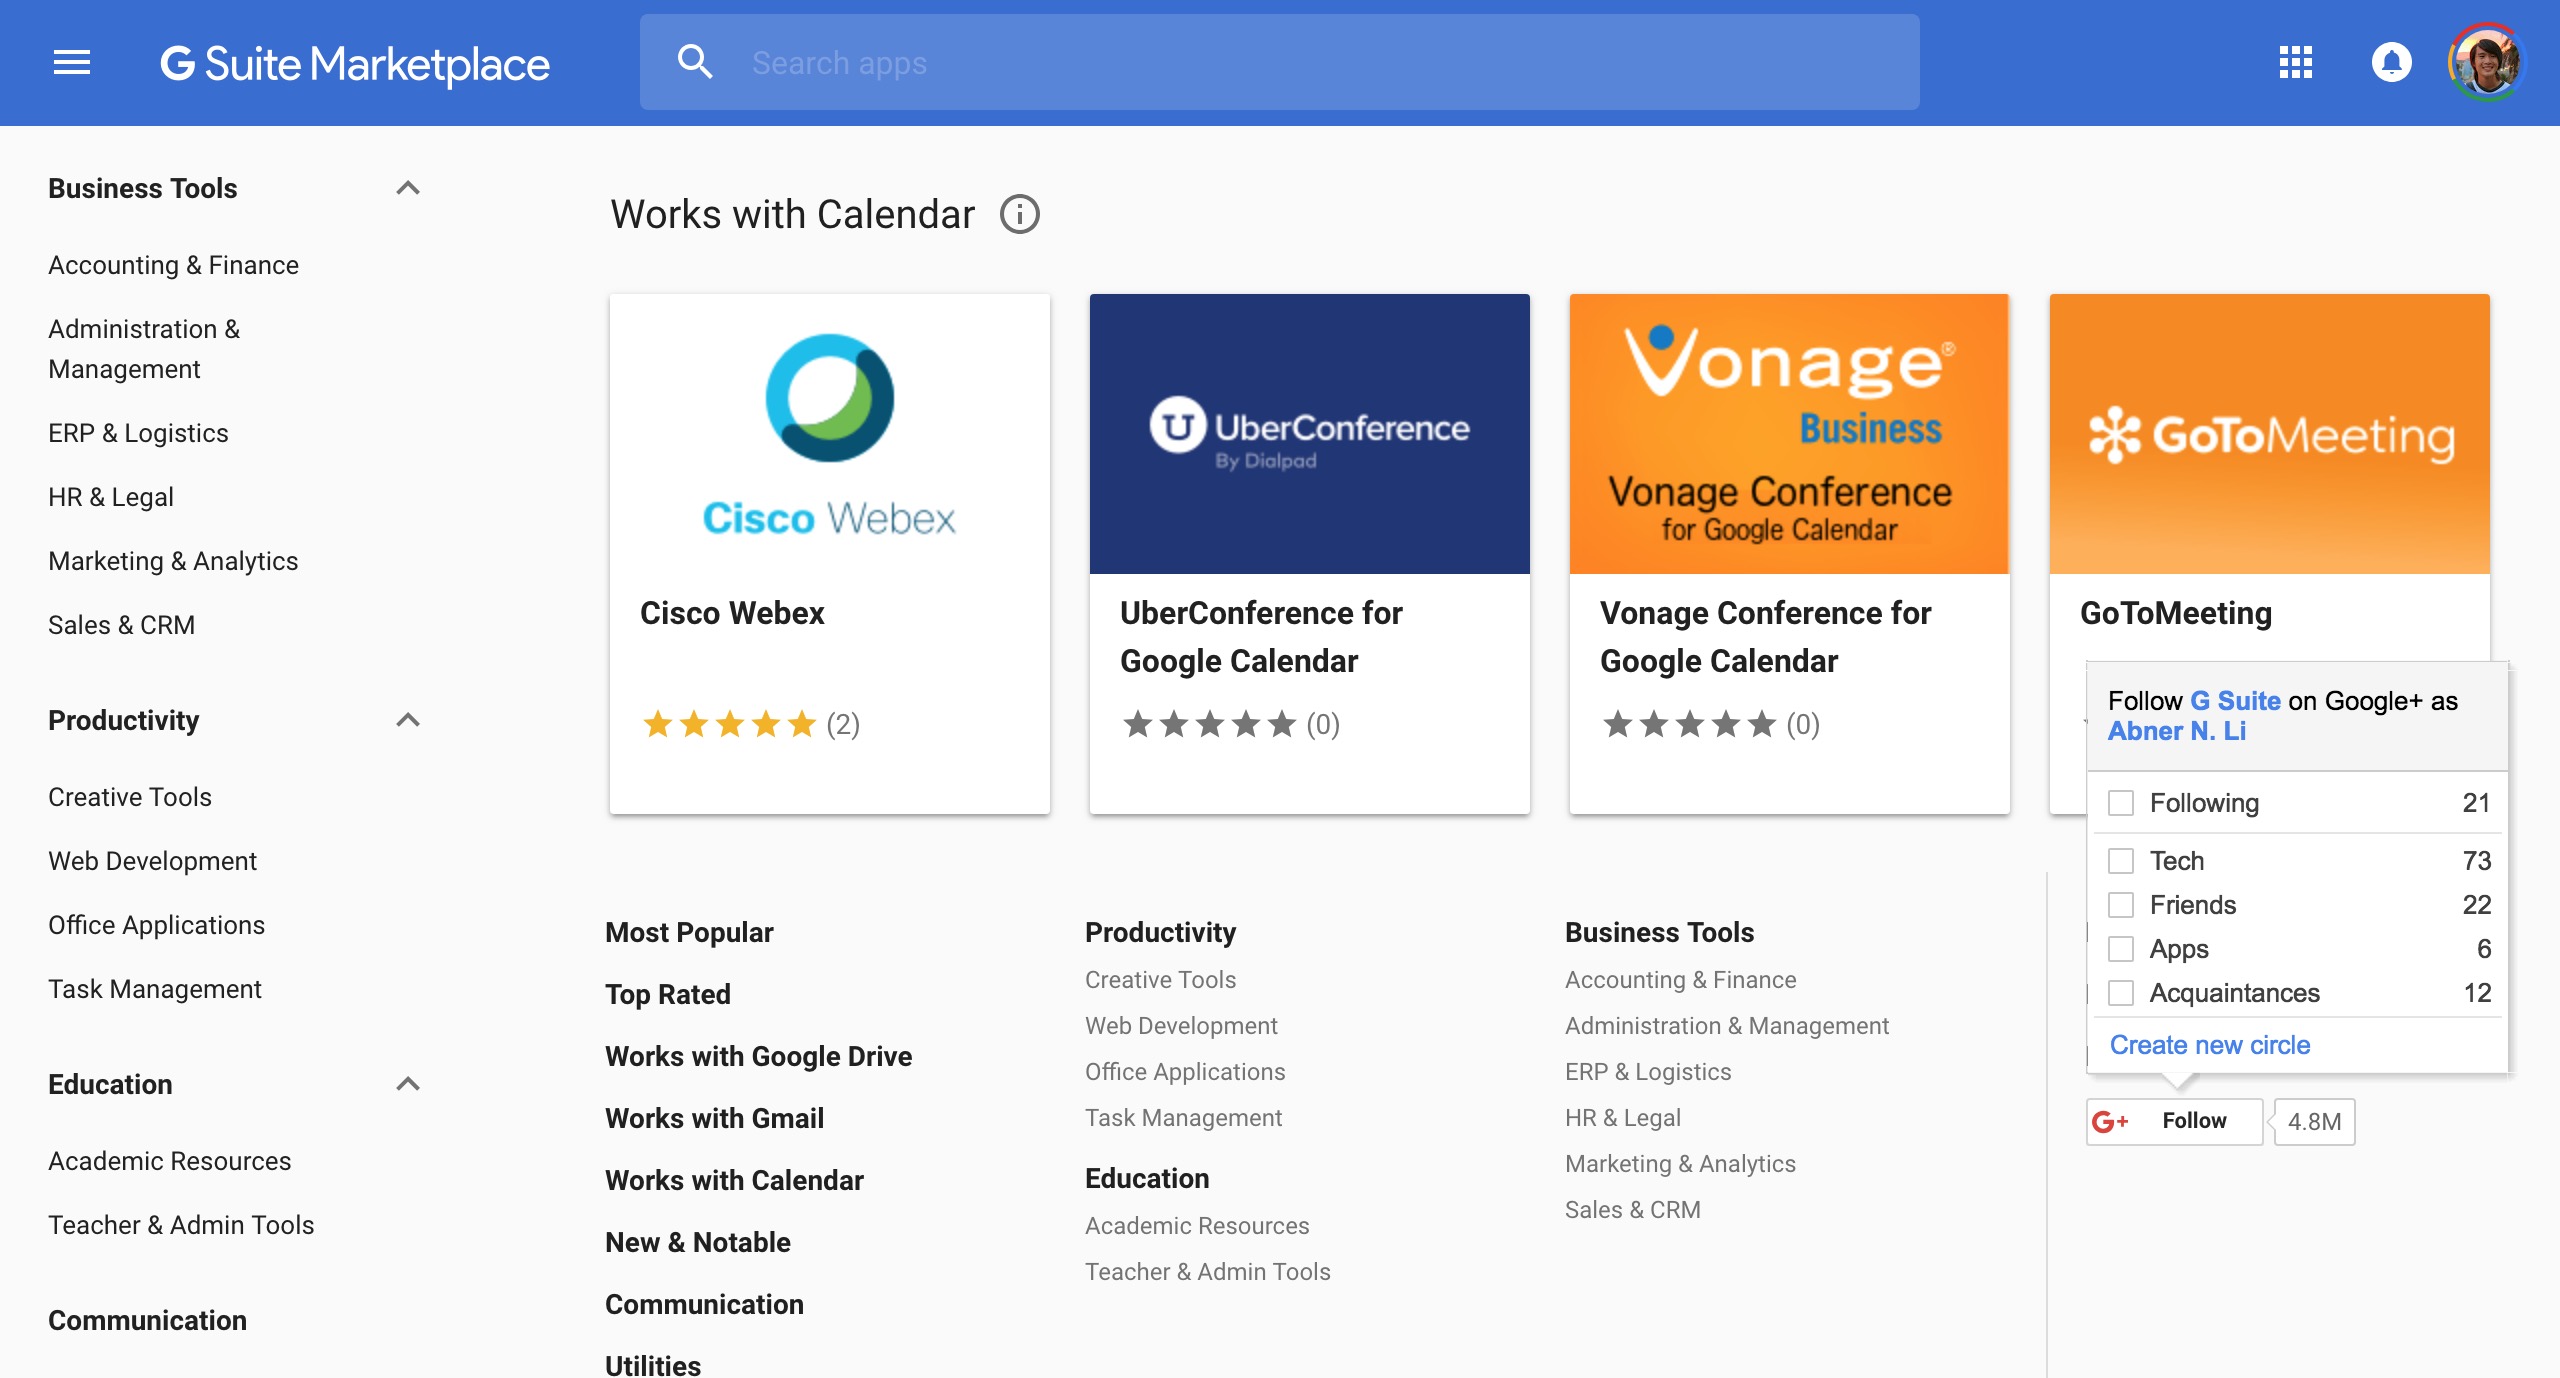 Google Calendar addons bring support for conferencing tools 9to5Google